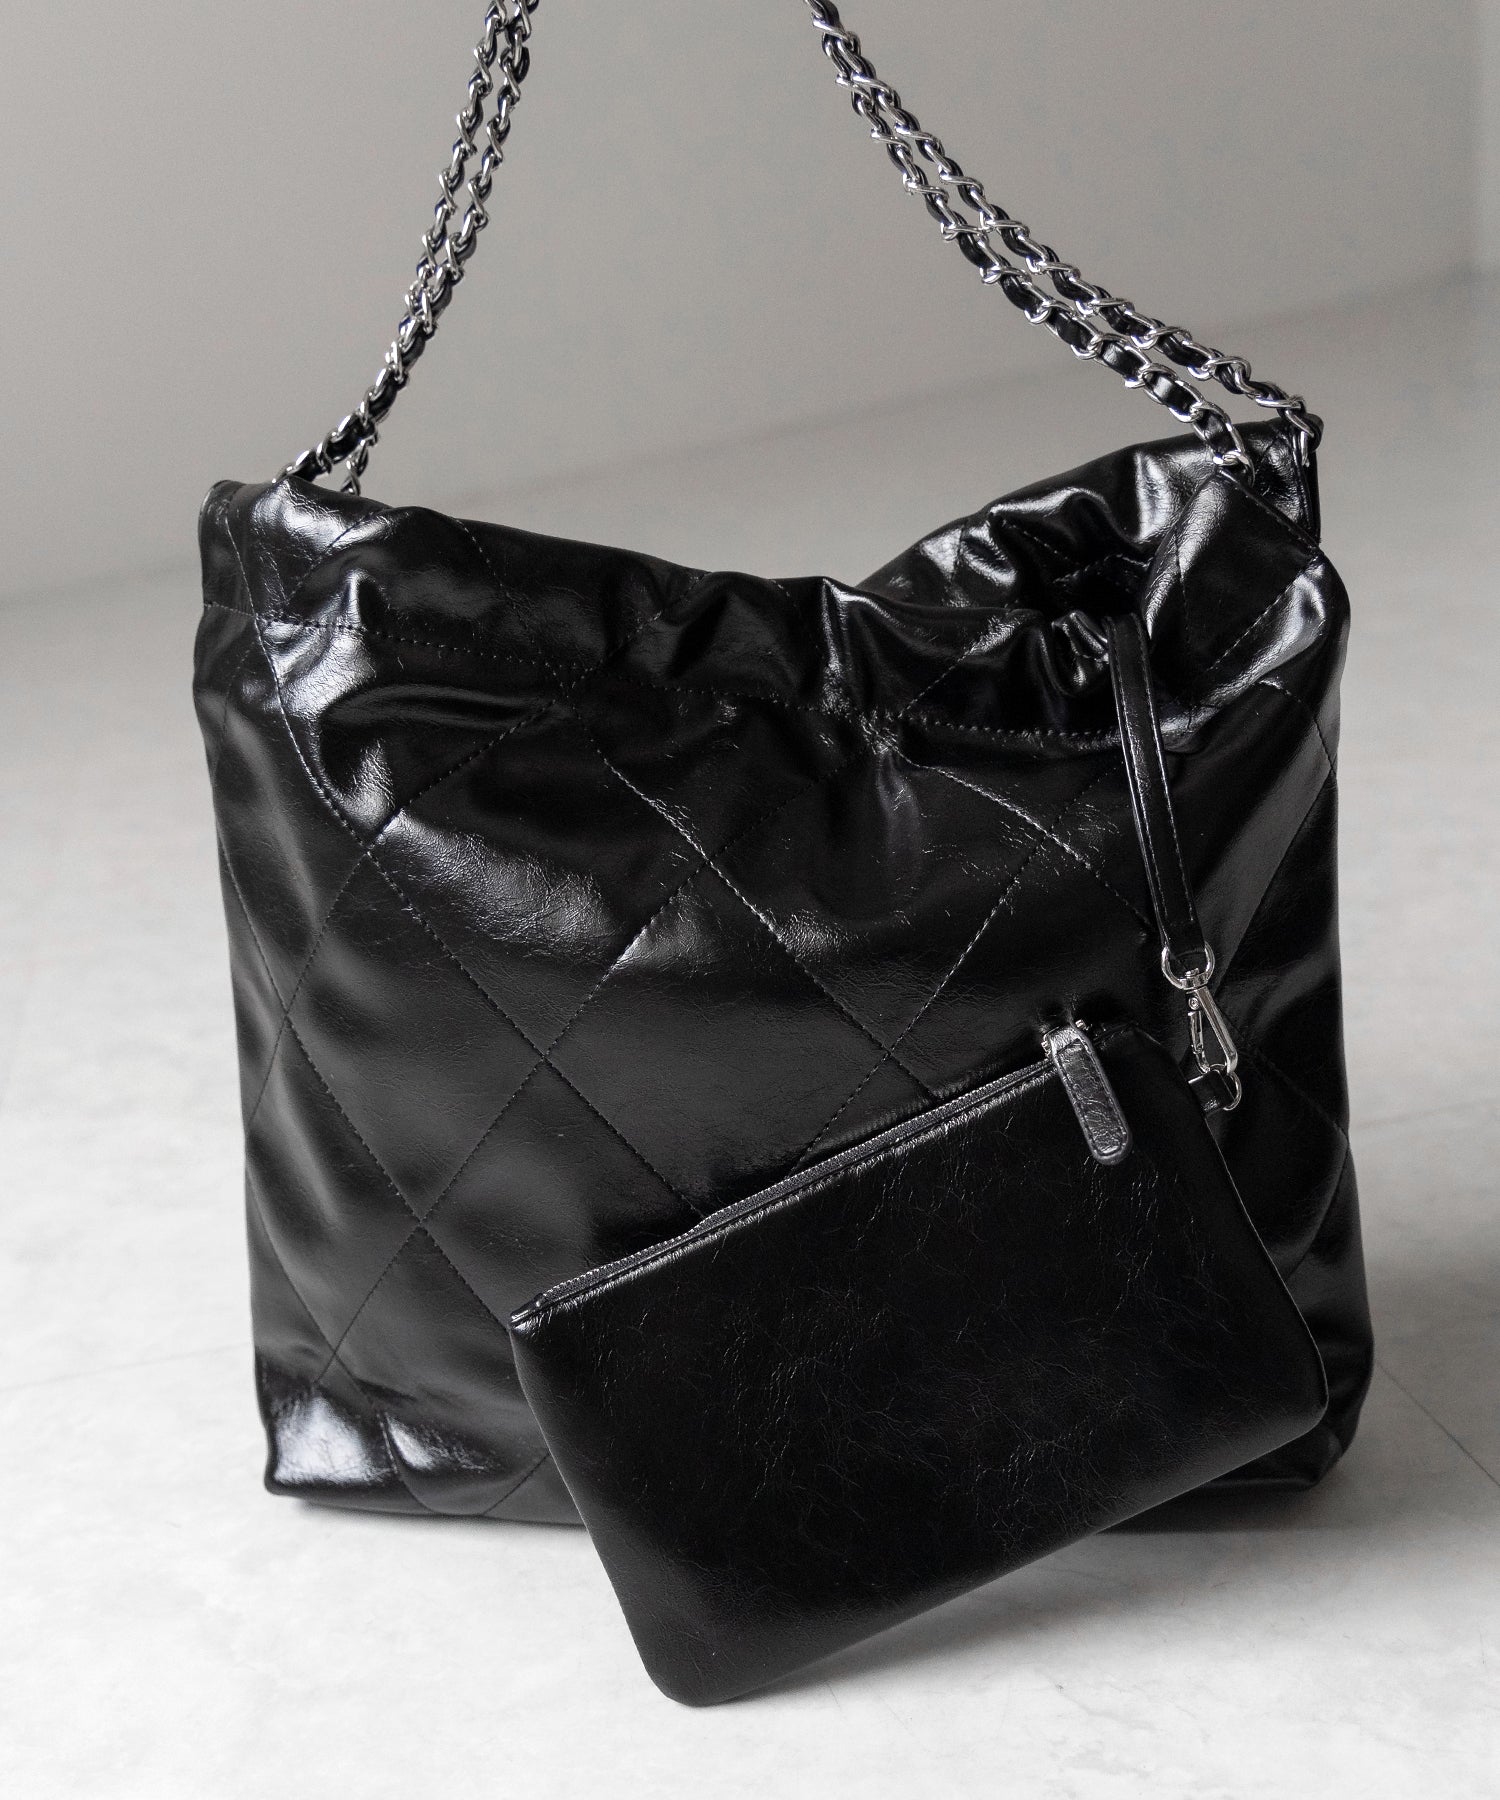 【 ２color 】キルティングチェーントートショルダーバッグ ／ quilting chain tote shoulder bag